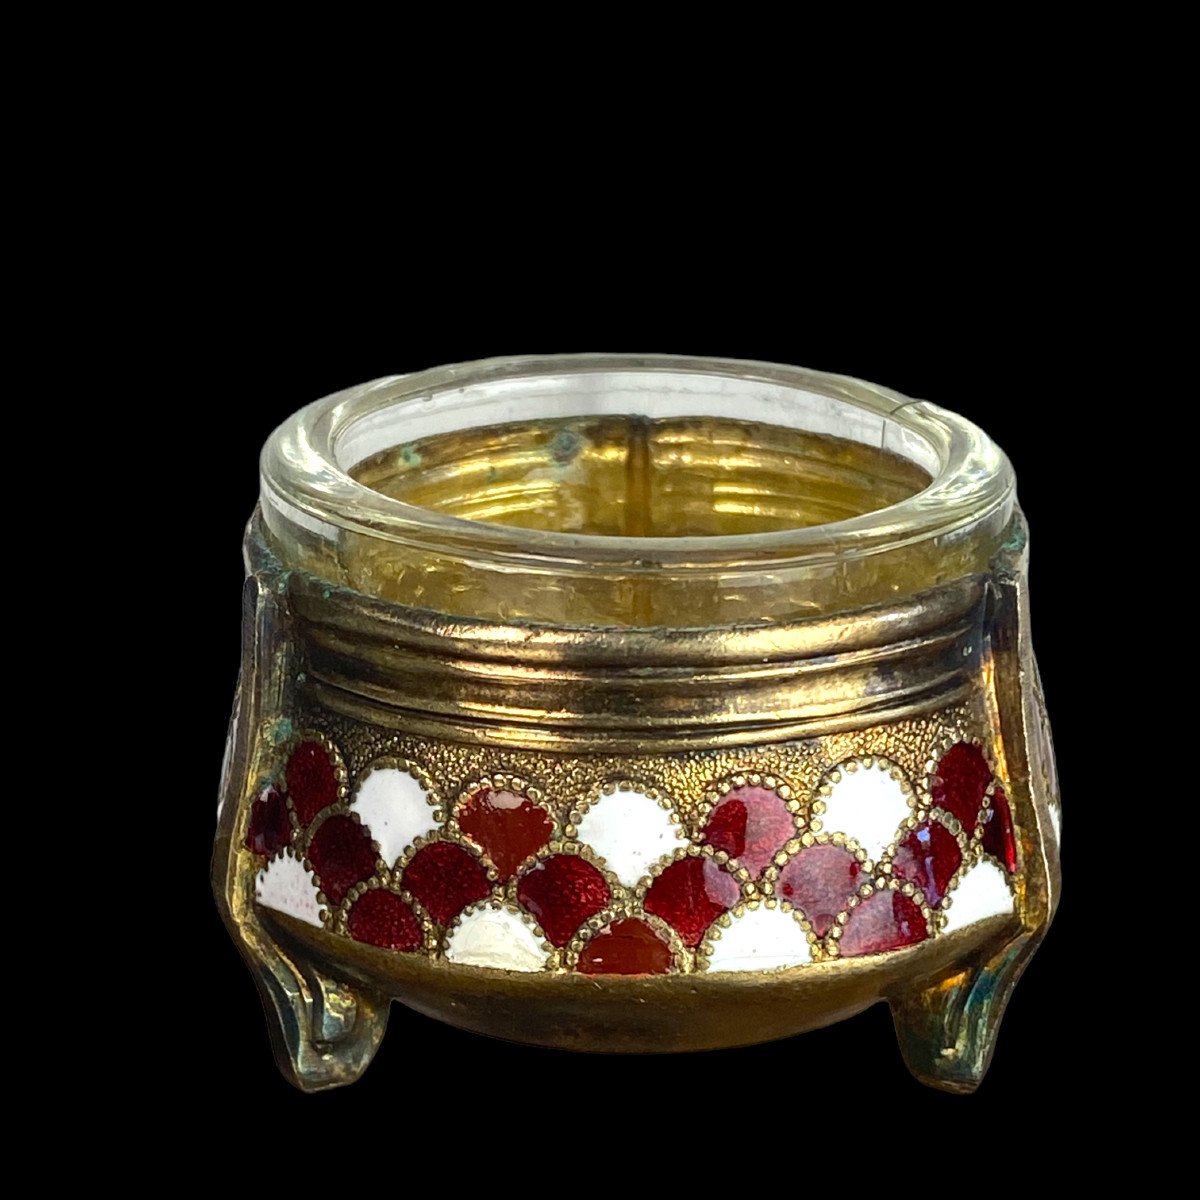 Russian Salt Shaker In Enameled Golden Metal With Its Signed And Numbered Glass Verrine-photo-3